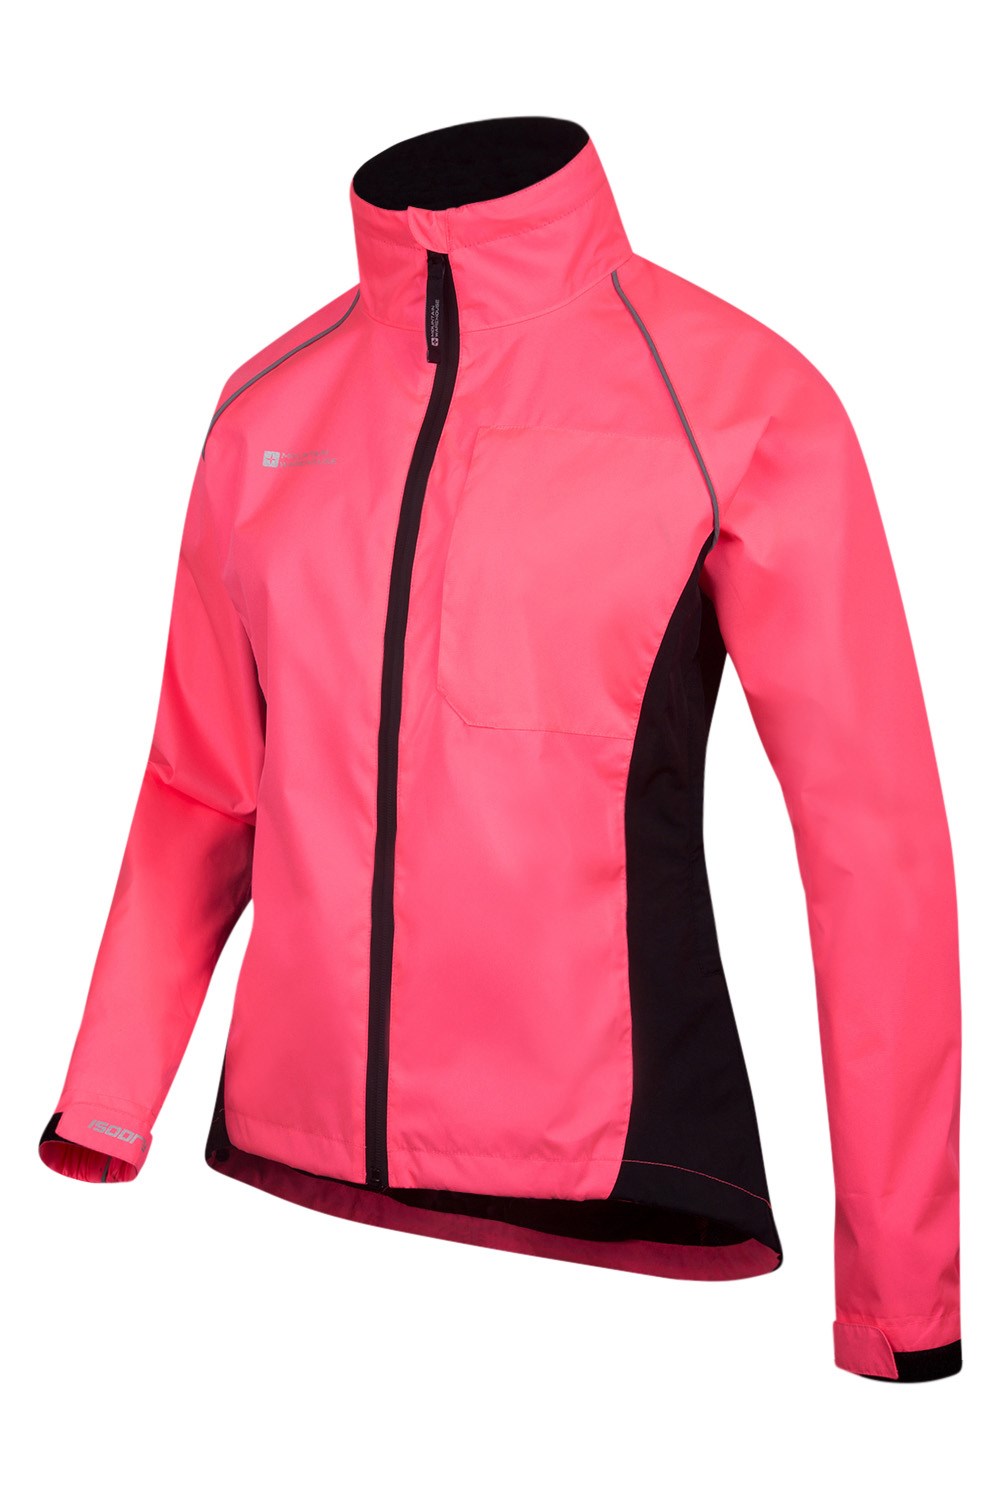 Mountain Warehouse Womens Jacket with IsoDry Fabric and Breathable ...